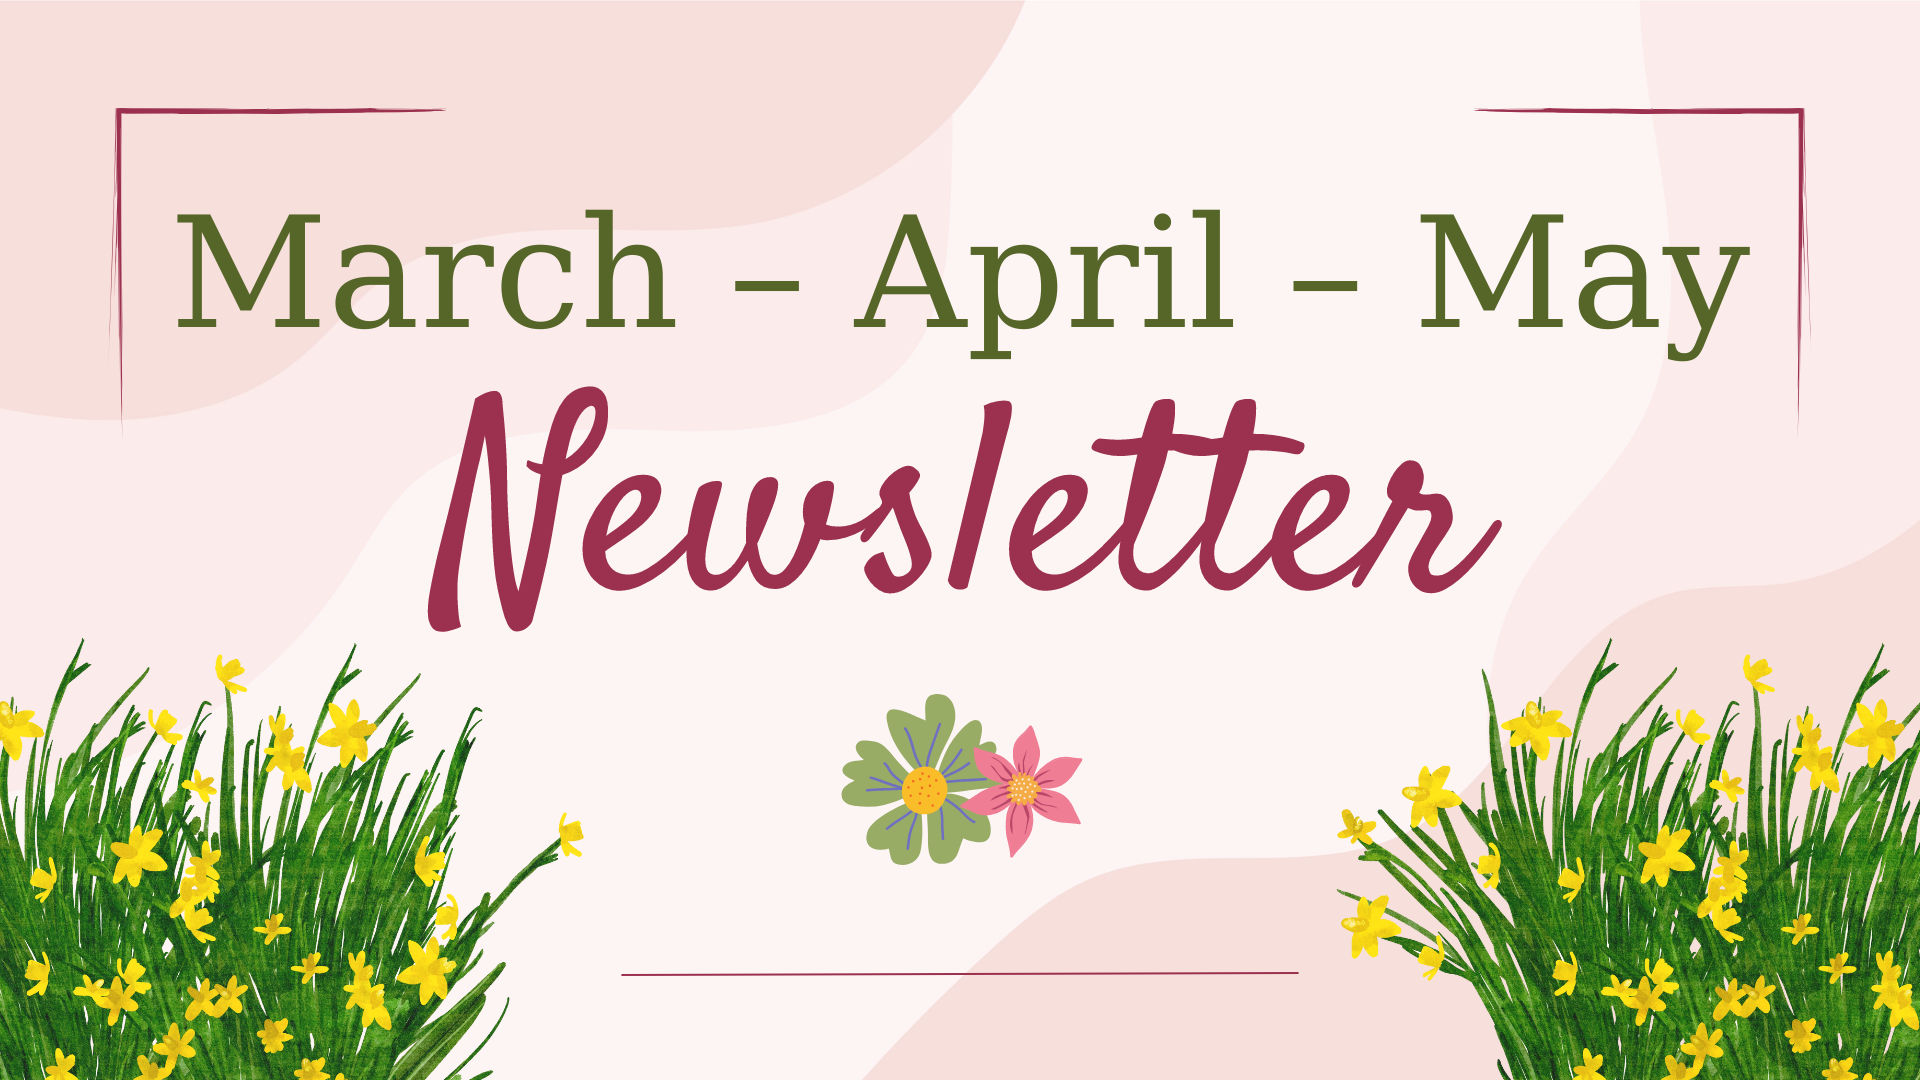 March-April-May Newsletter